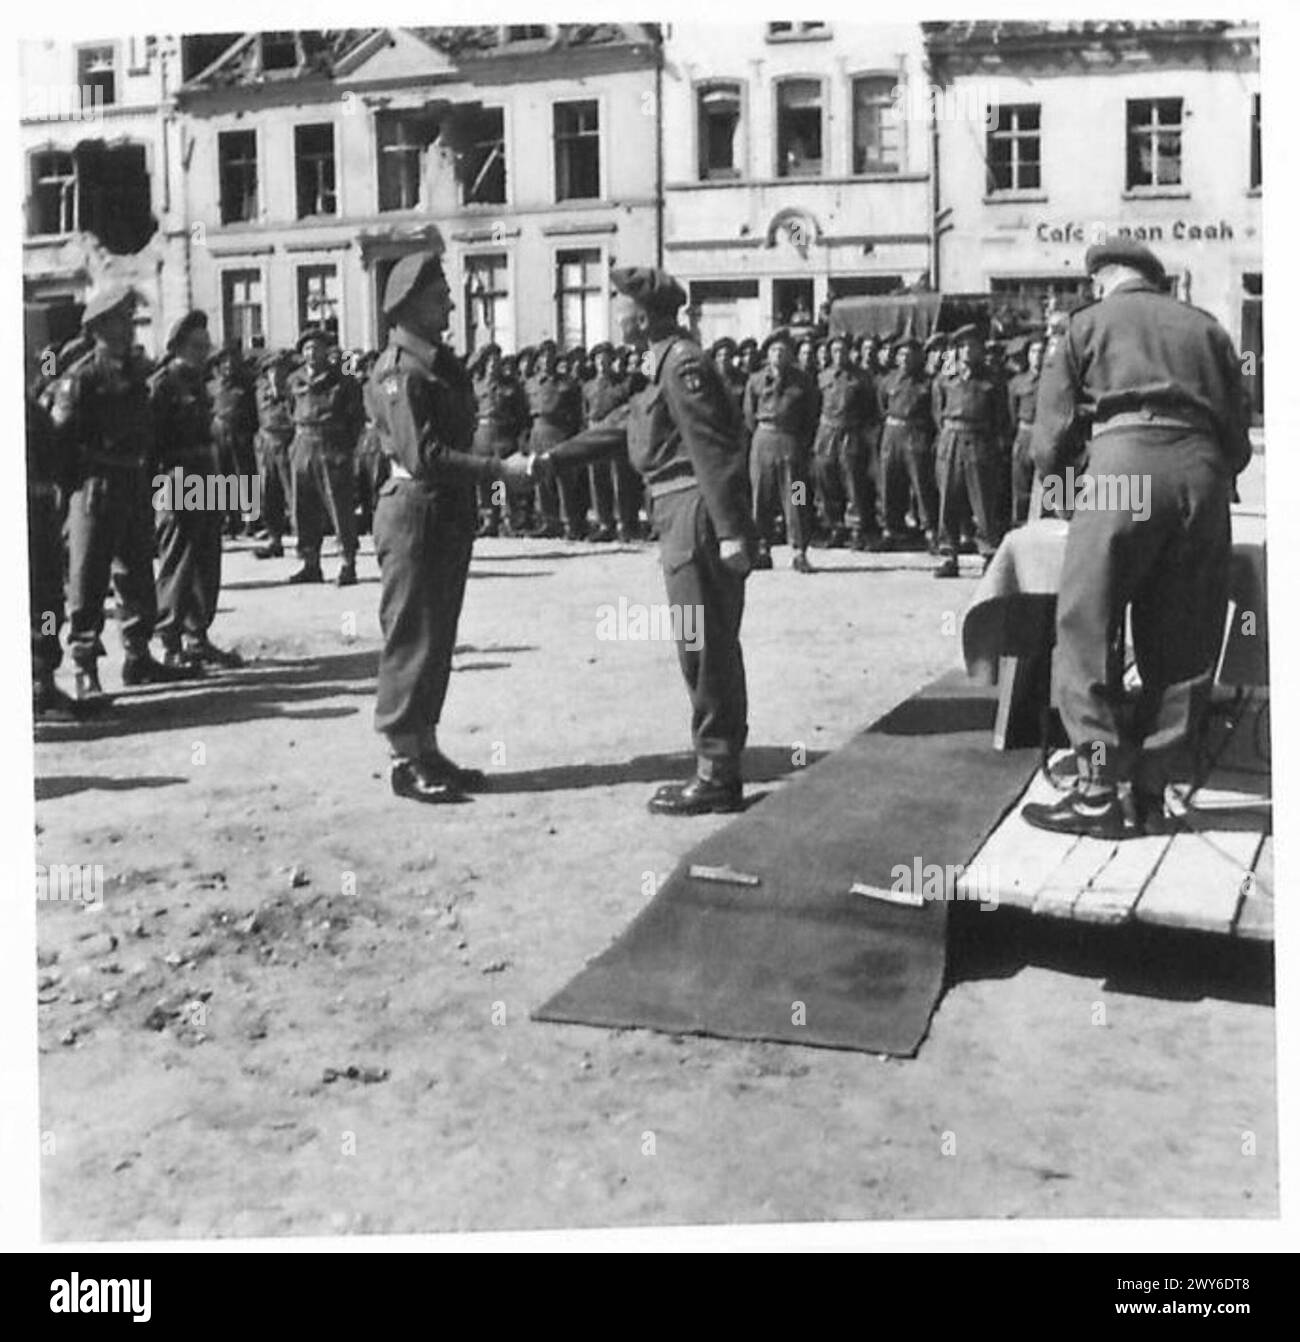 V.E.PARADE OF 107 H.A.A. REGIMENT, R.A. - The C.O. presenting awards to men of the Regiment. , British Army, 21st Army Group Stock Photo